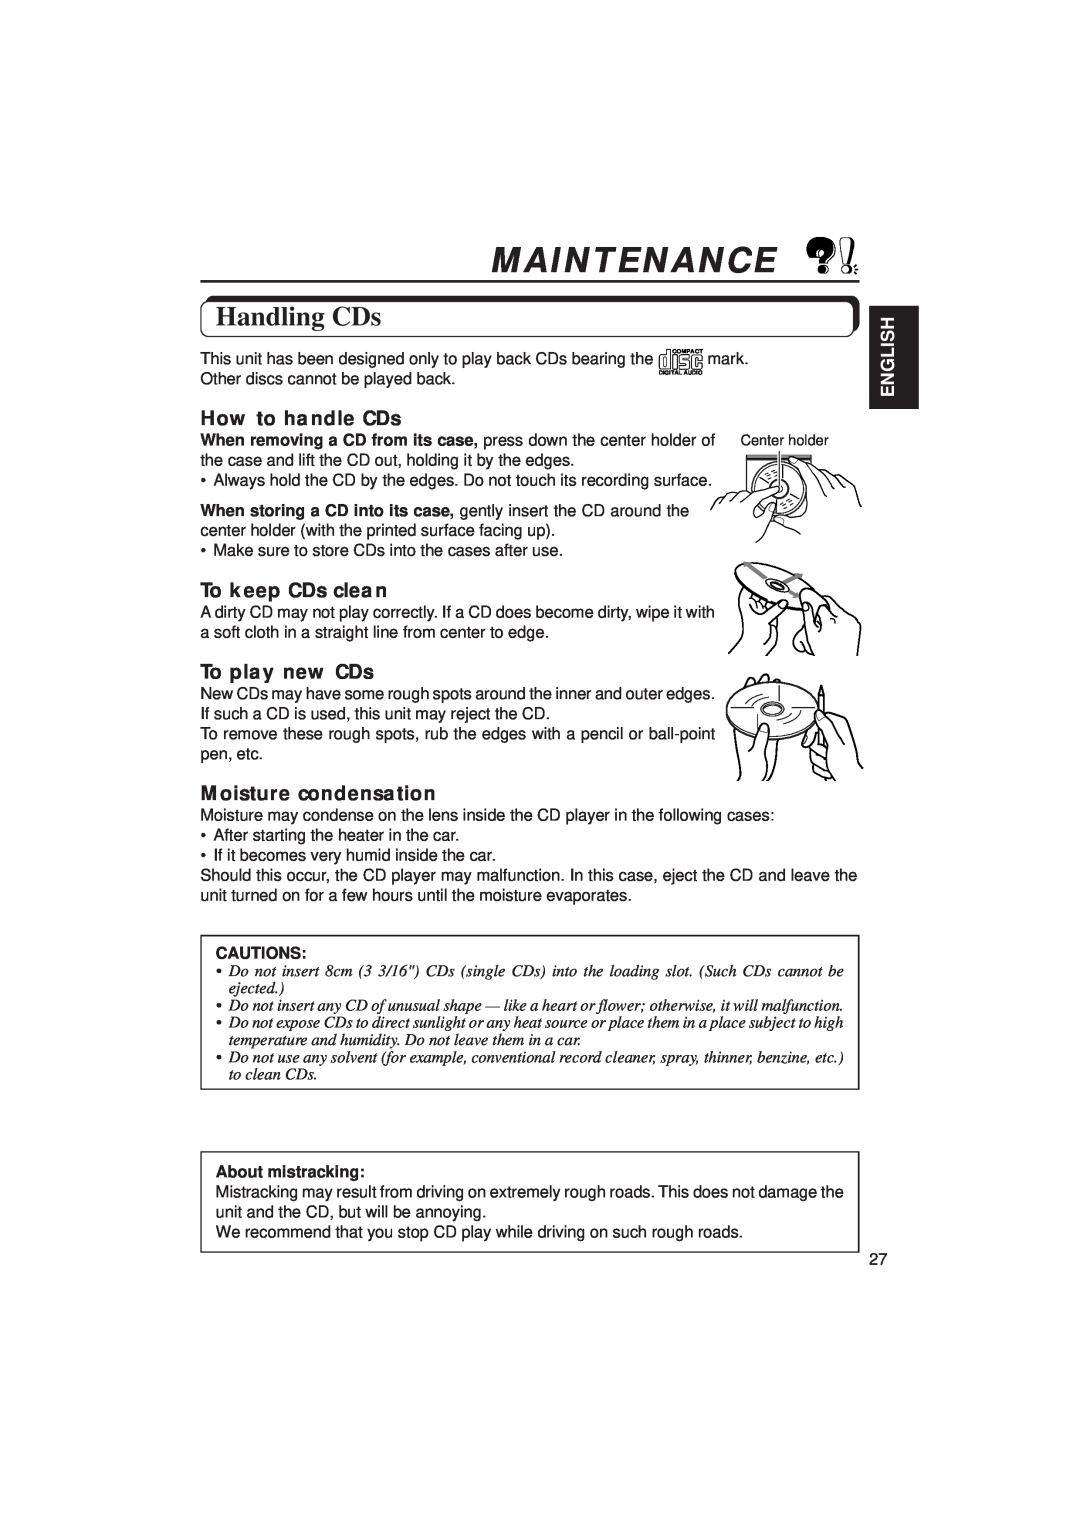 JVC KD-SX939/SX930 Maintenance, Handling CDs, How to handle CDs, To keep CDs clean, To play new CDs, Moisture condensation 